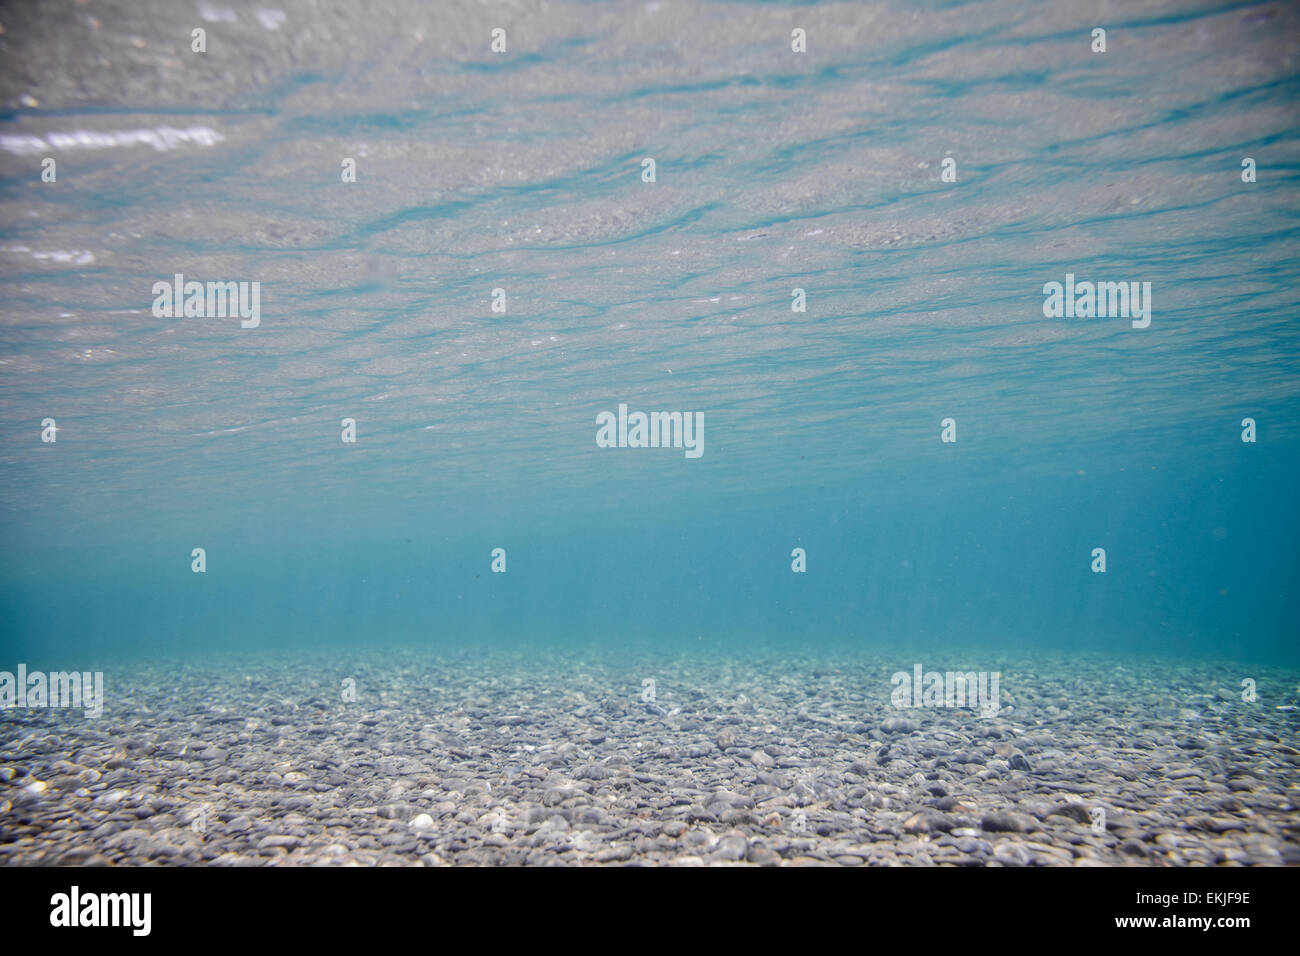 Underwater Image of Clear Water River Stock Photo